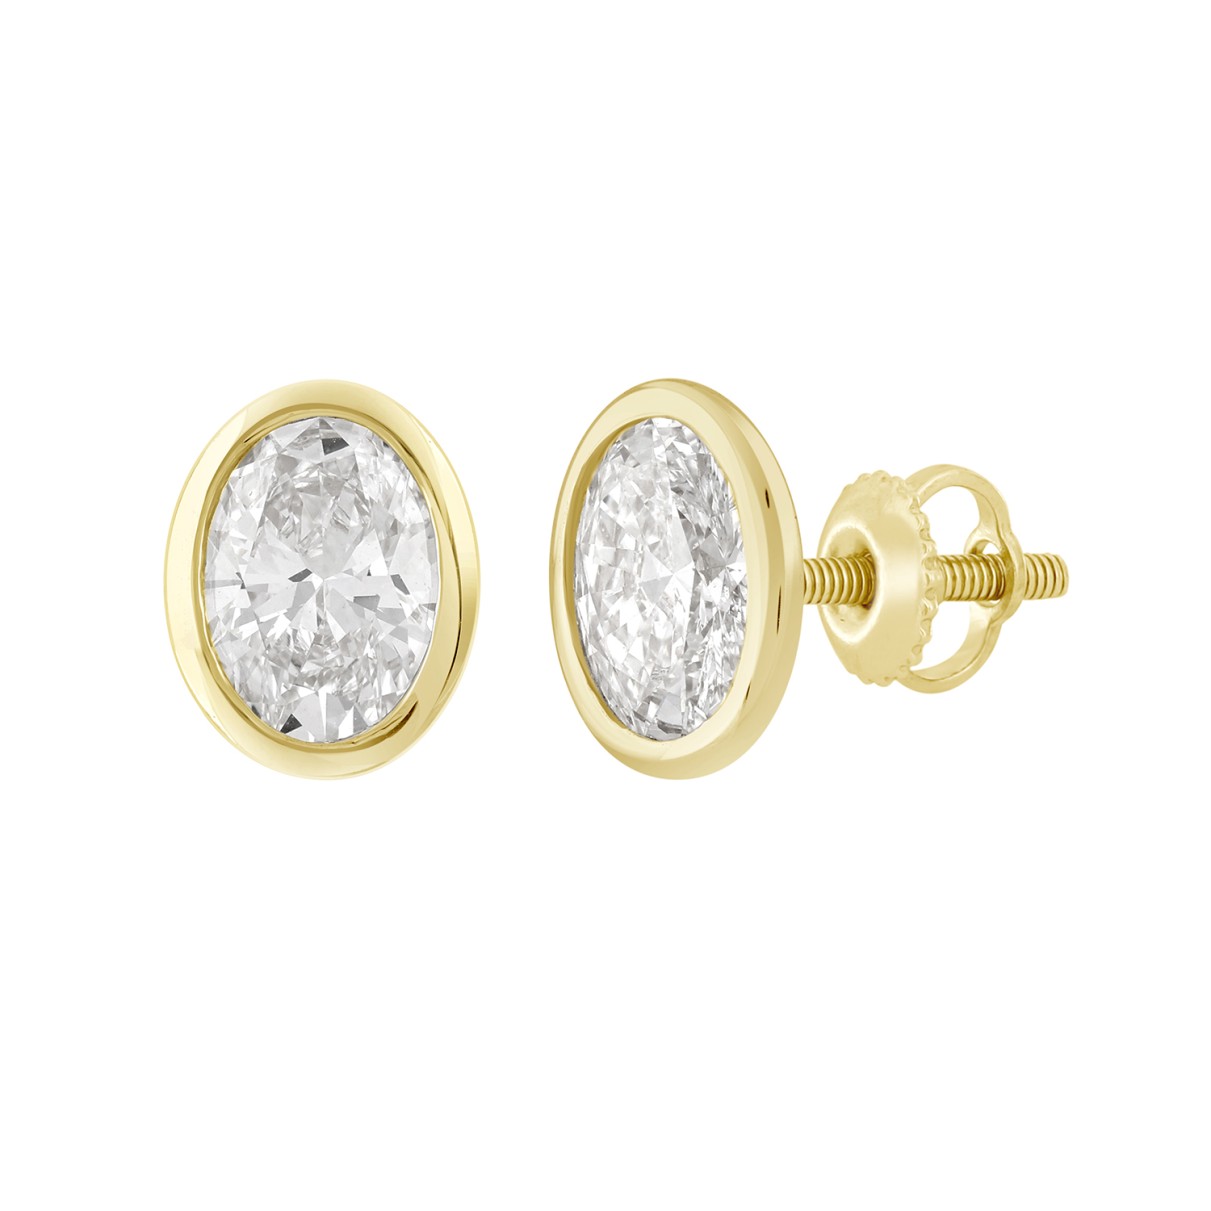 LADIES SOLITAIRE EARRINGS 2CT OVAL DIAMOND 14K YELLOW GOLD